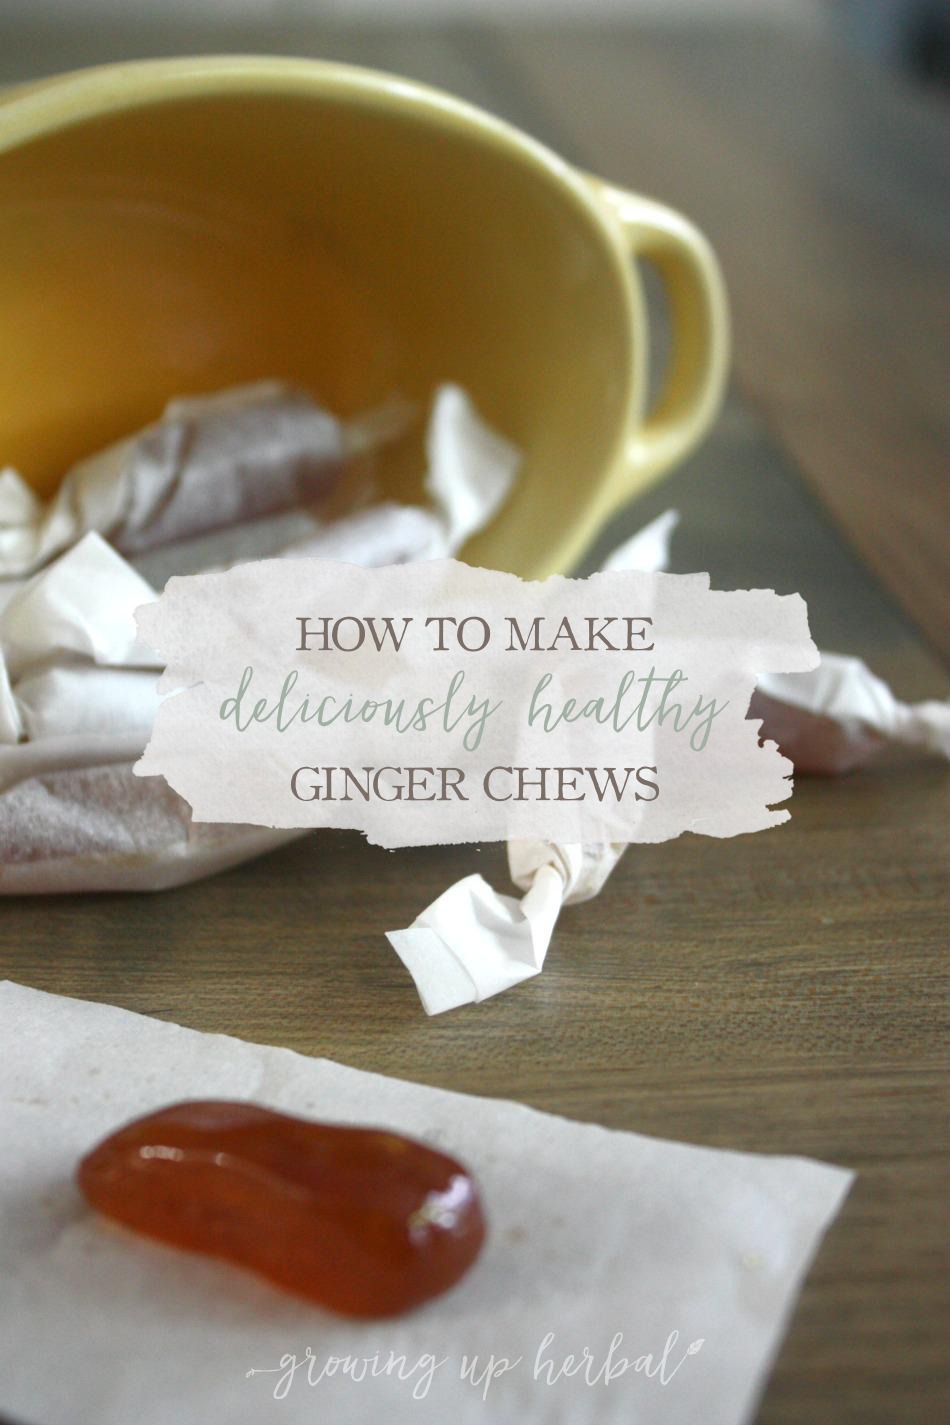 How To Make Deliciously Healthy Ginger Chews | Growing Up Herbal | Ginger chews are not only a delicious way to get herbs into your kids, but they help with upset tummies, car sickness, gas and more!